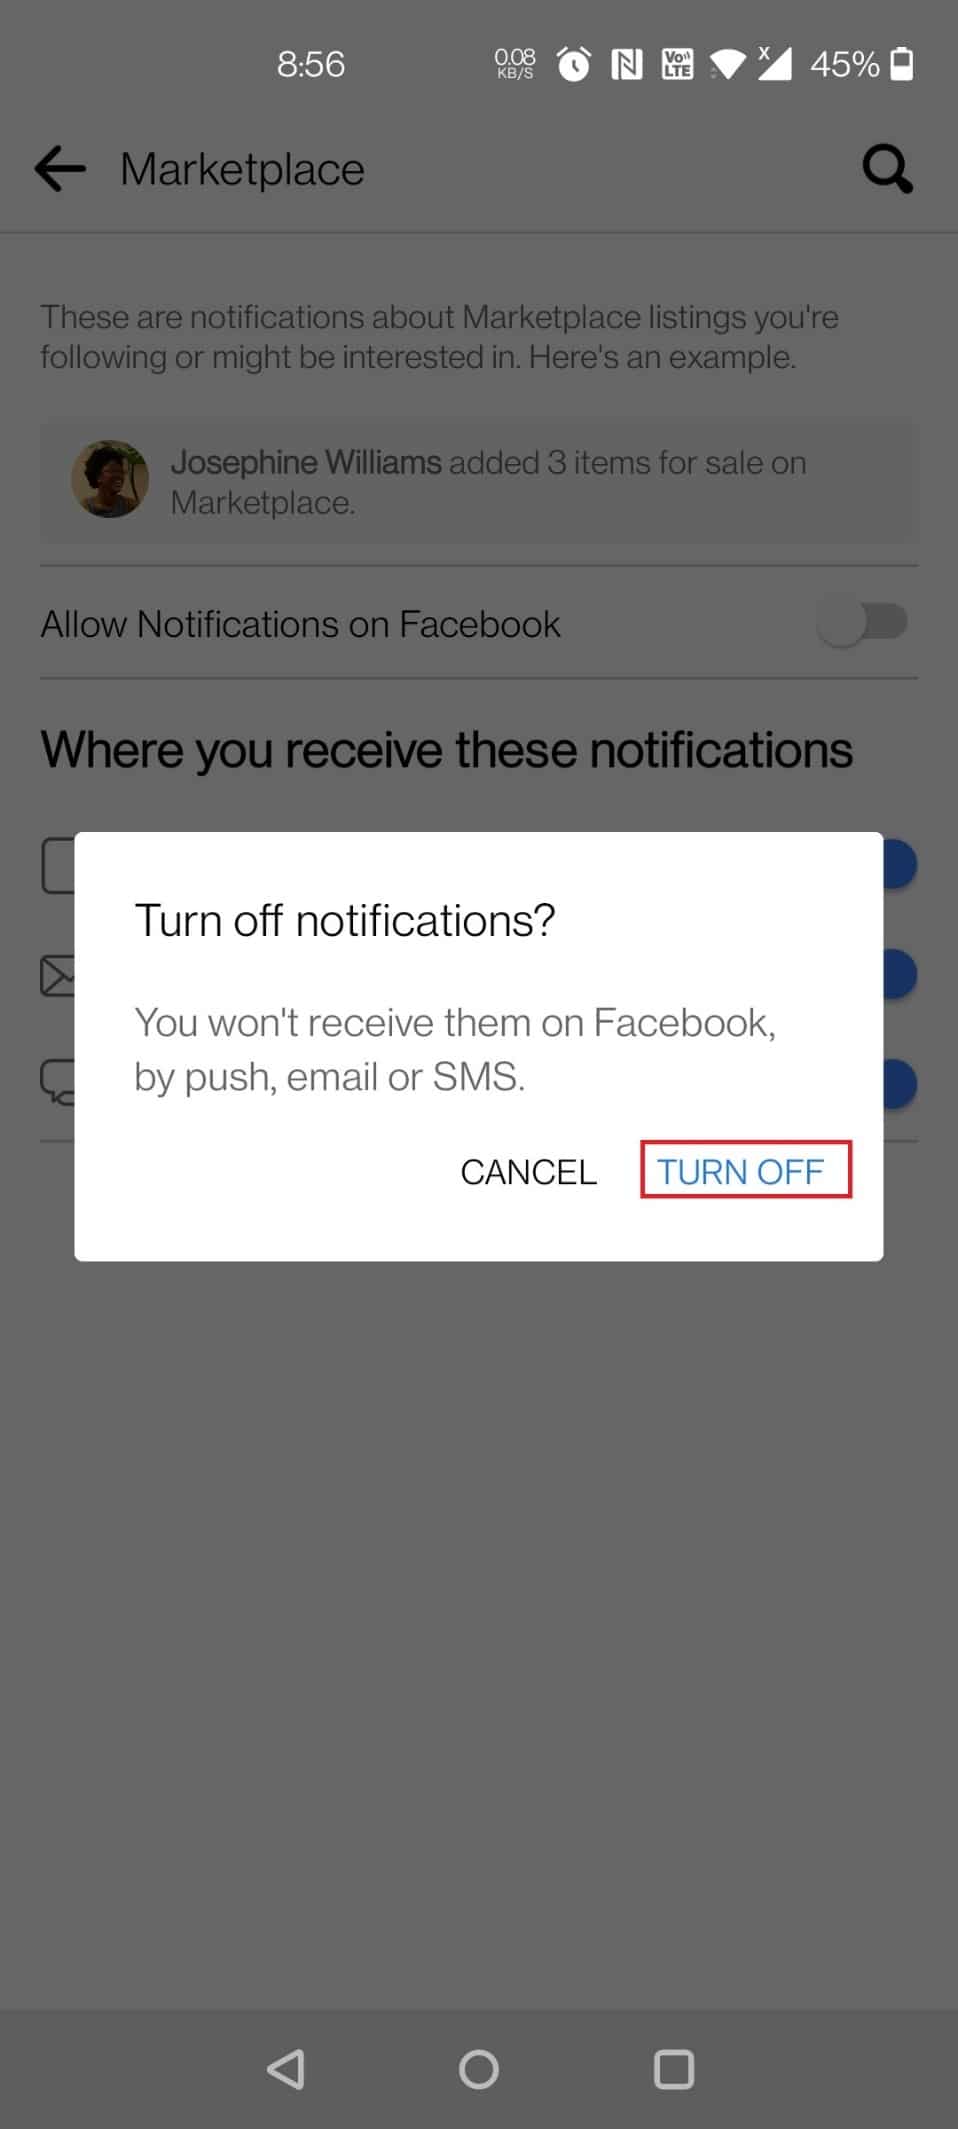 Tap Turn Off in the prompt. How to Turn Off Facebook Marketplace Notifications